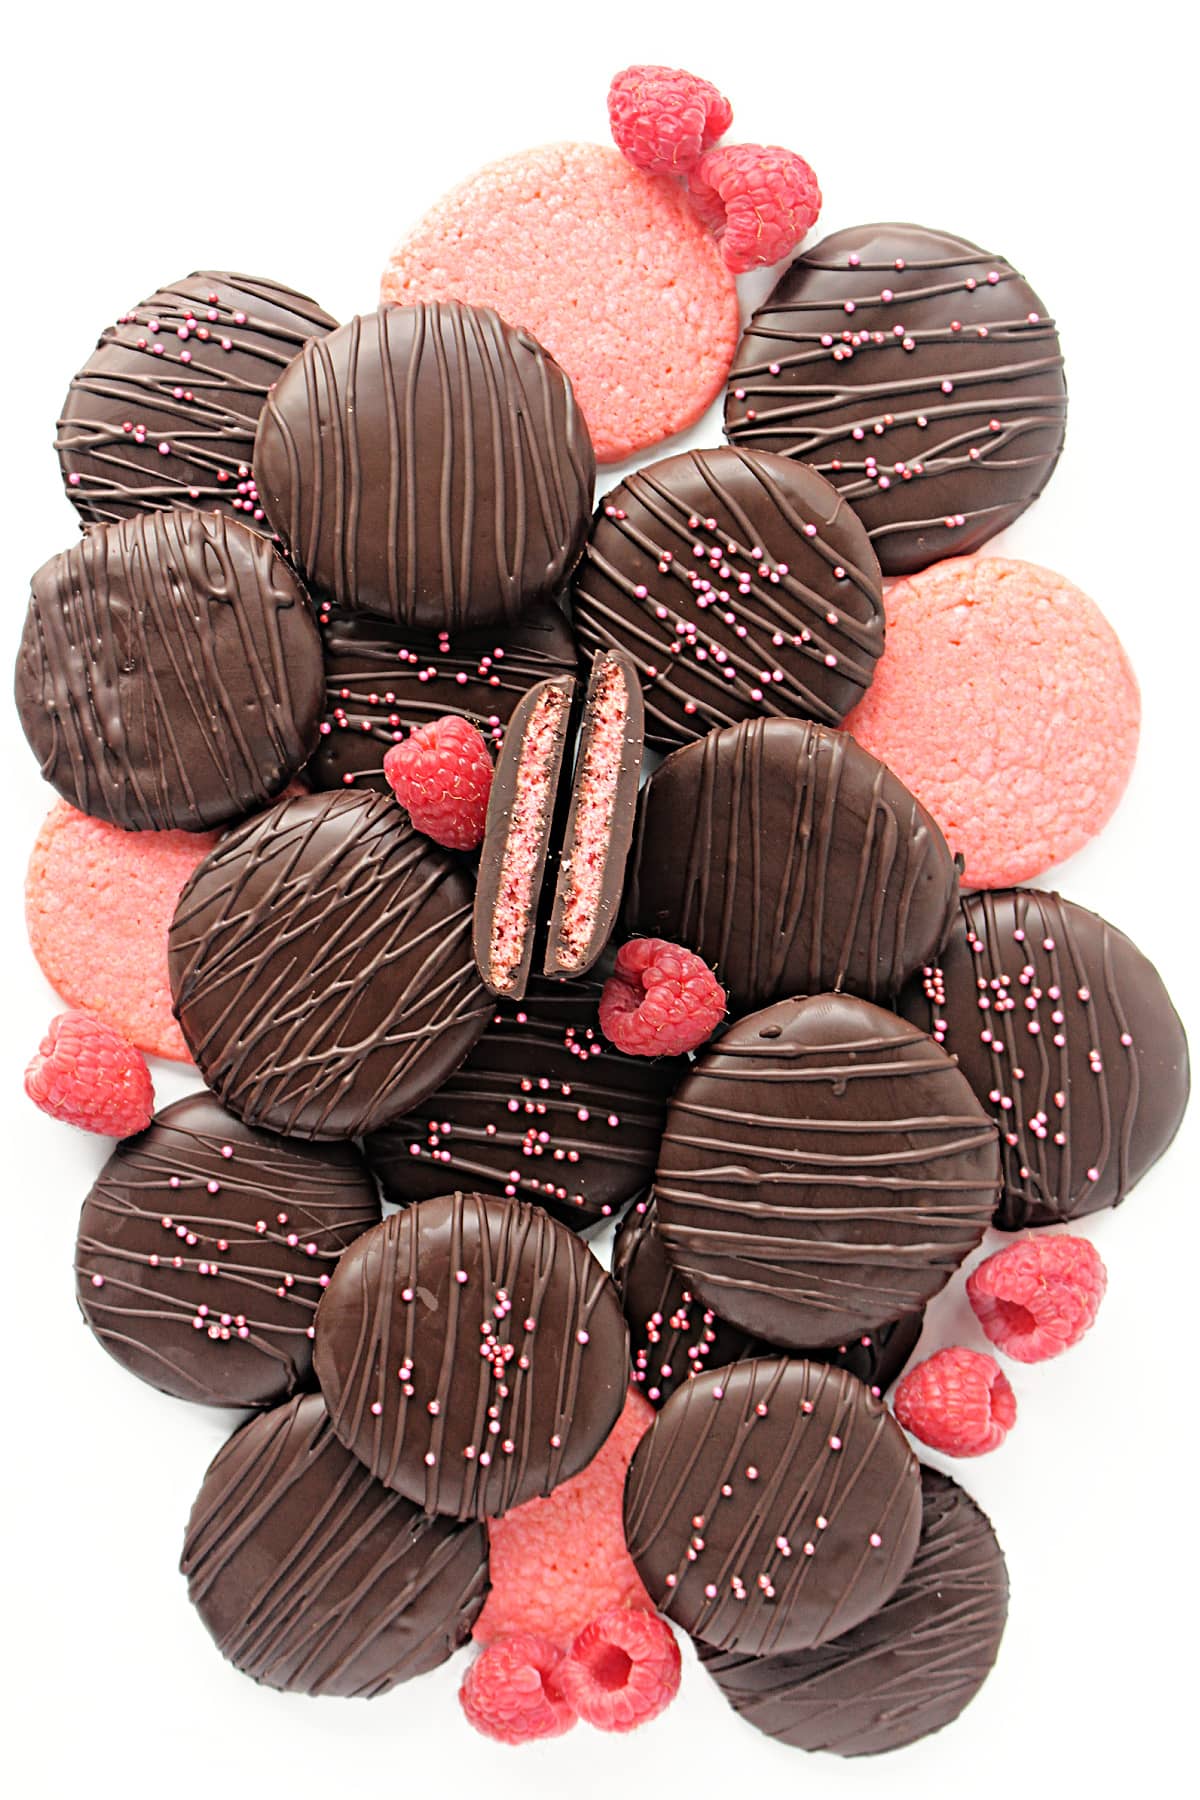 Thin, pink raspberry cookies coated in chocolate decorated with chocolate zigzags and sprinkles.